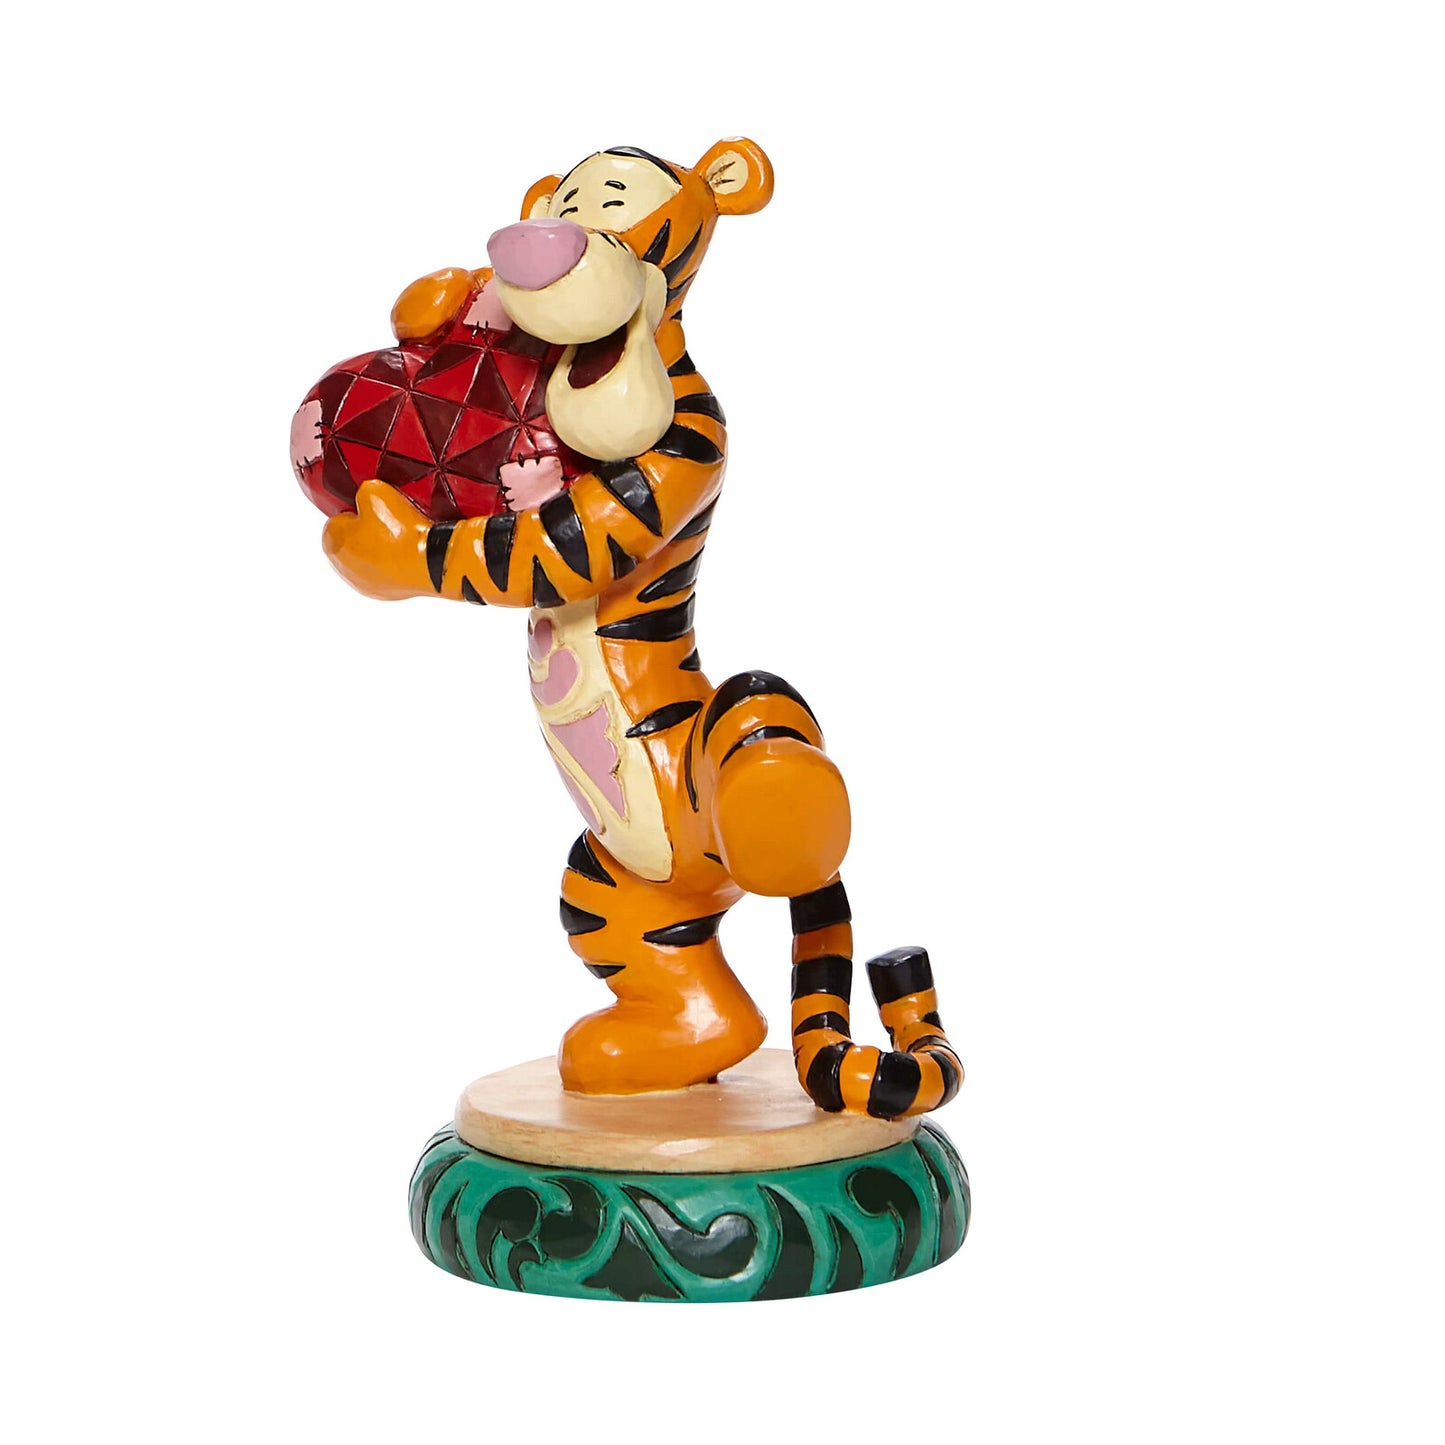 DISNEY TRADITIONS TIGGER HOLDING HEART FIGURINE - Gifts R Us